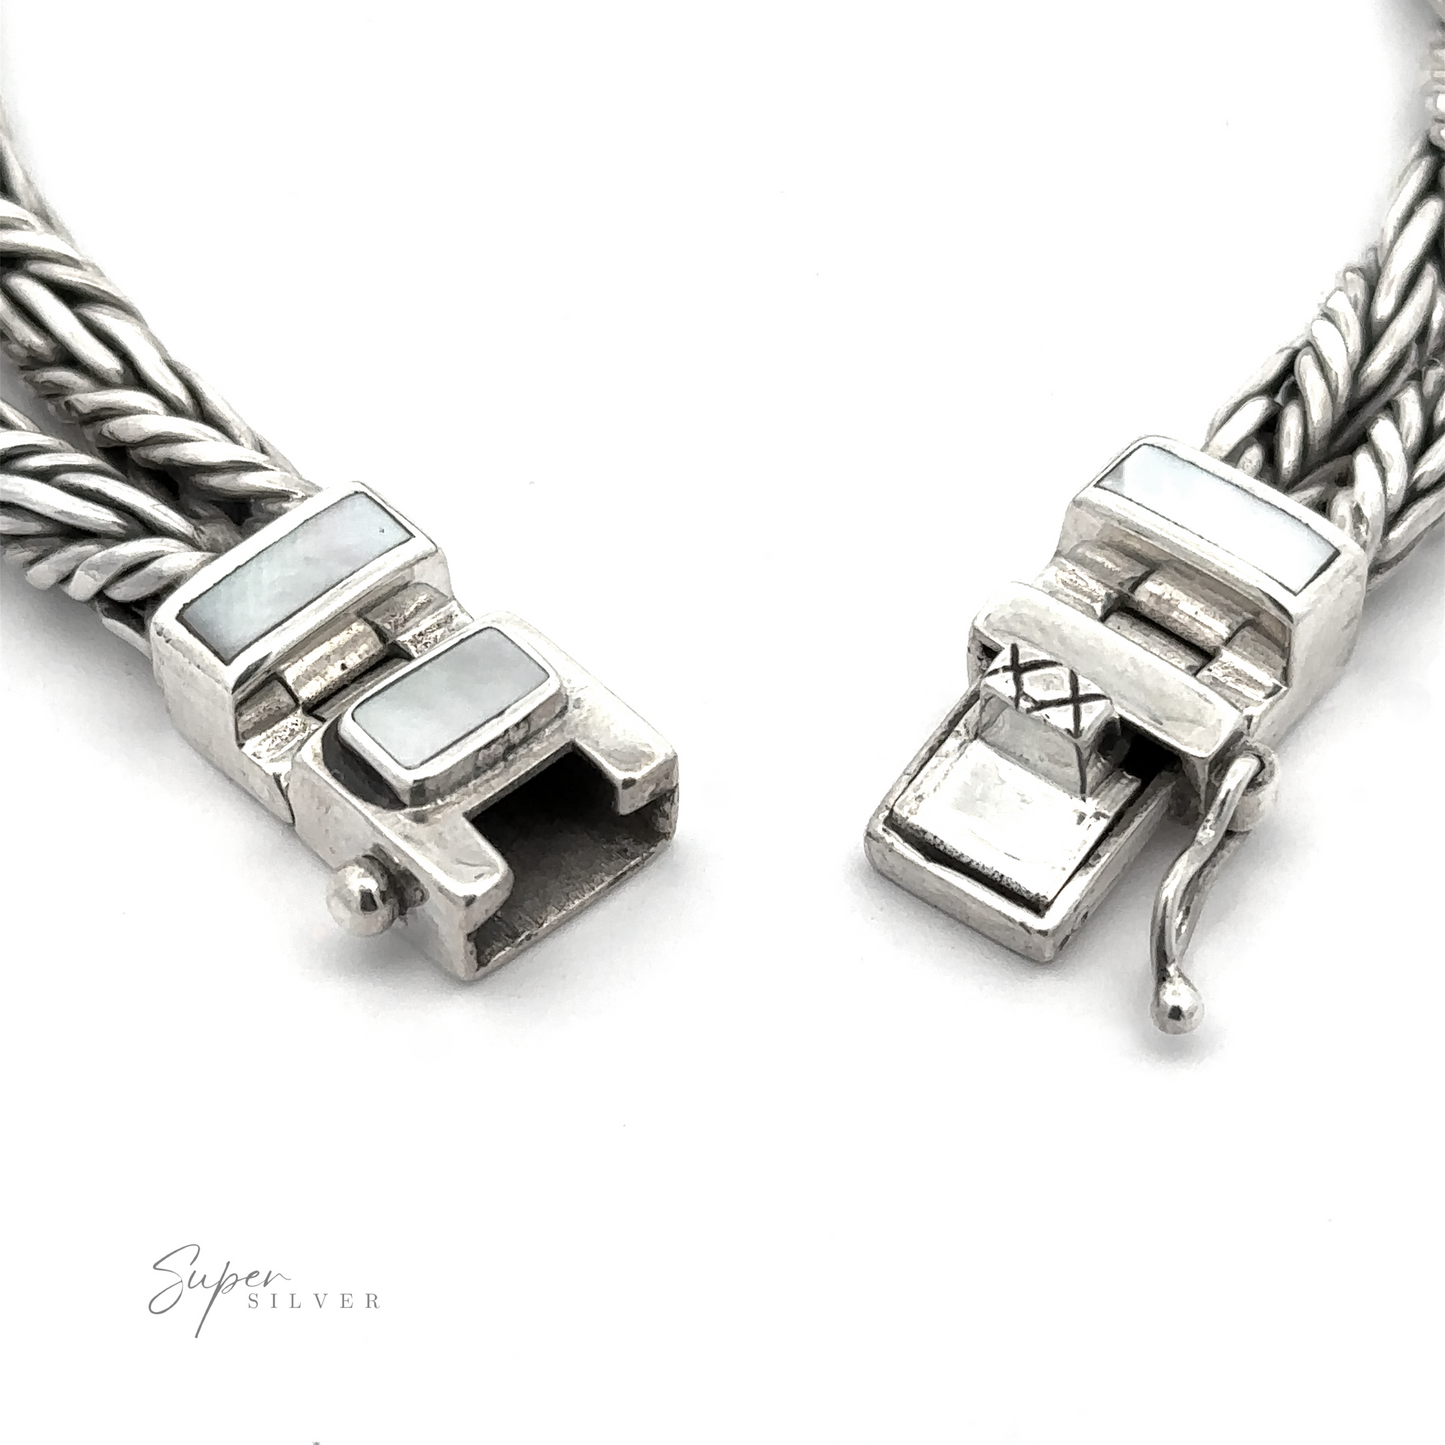 
                  
                    Close-up of a .925 Sterling Silver clasp mechanism on a white background showing intricate metalwork, rectangular stone inlays, and the elegant design of a Double Twisted Braided Rope Bracelet incorporating Red Coral elements.
                  
                